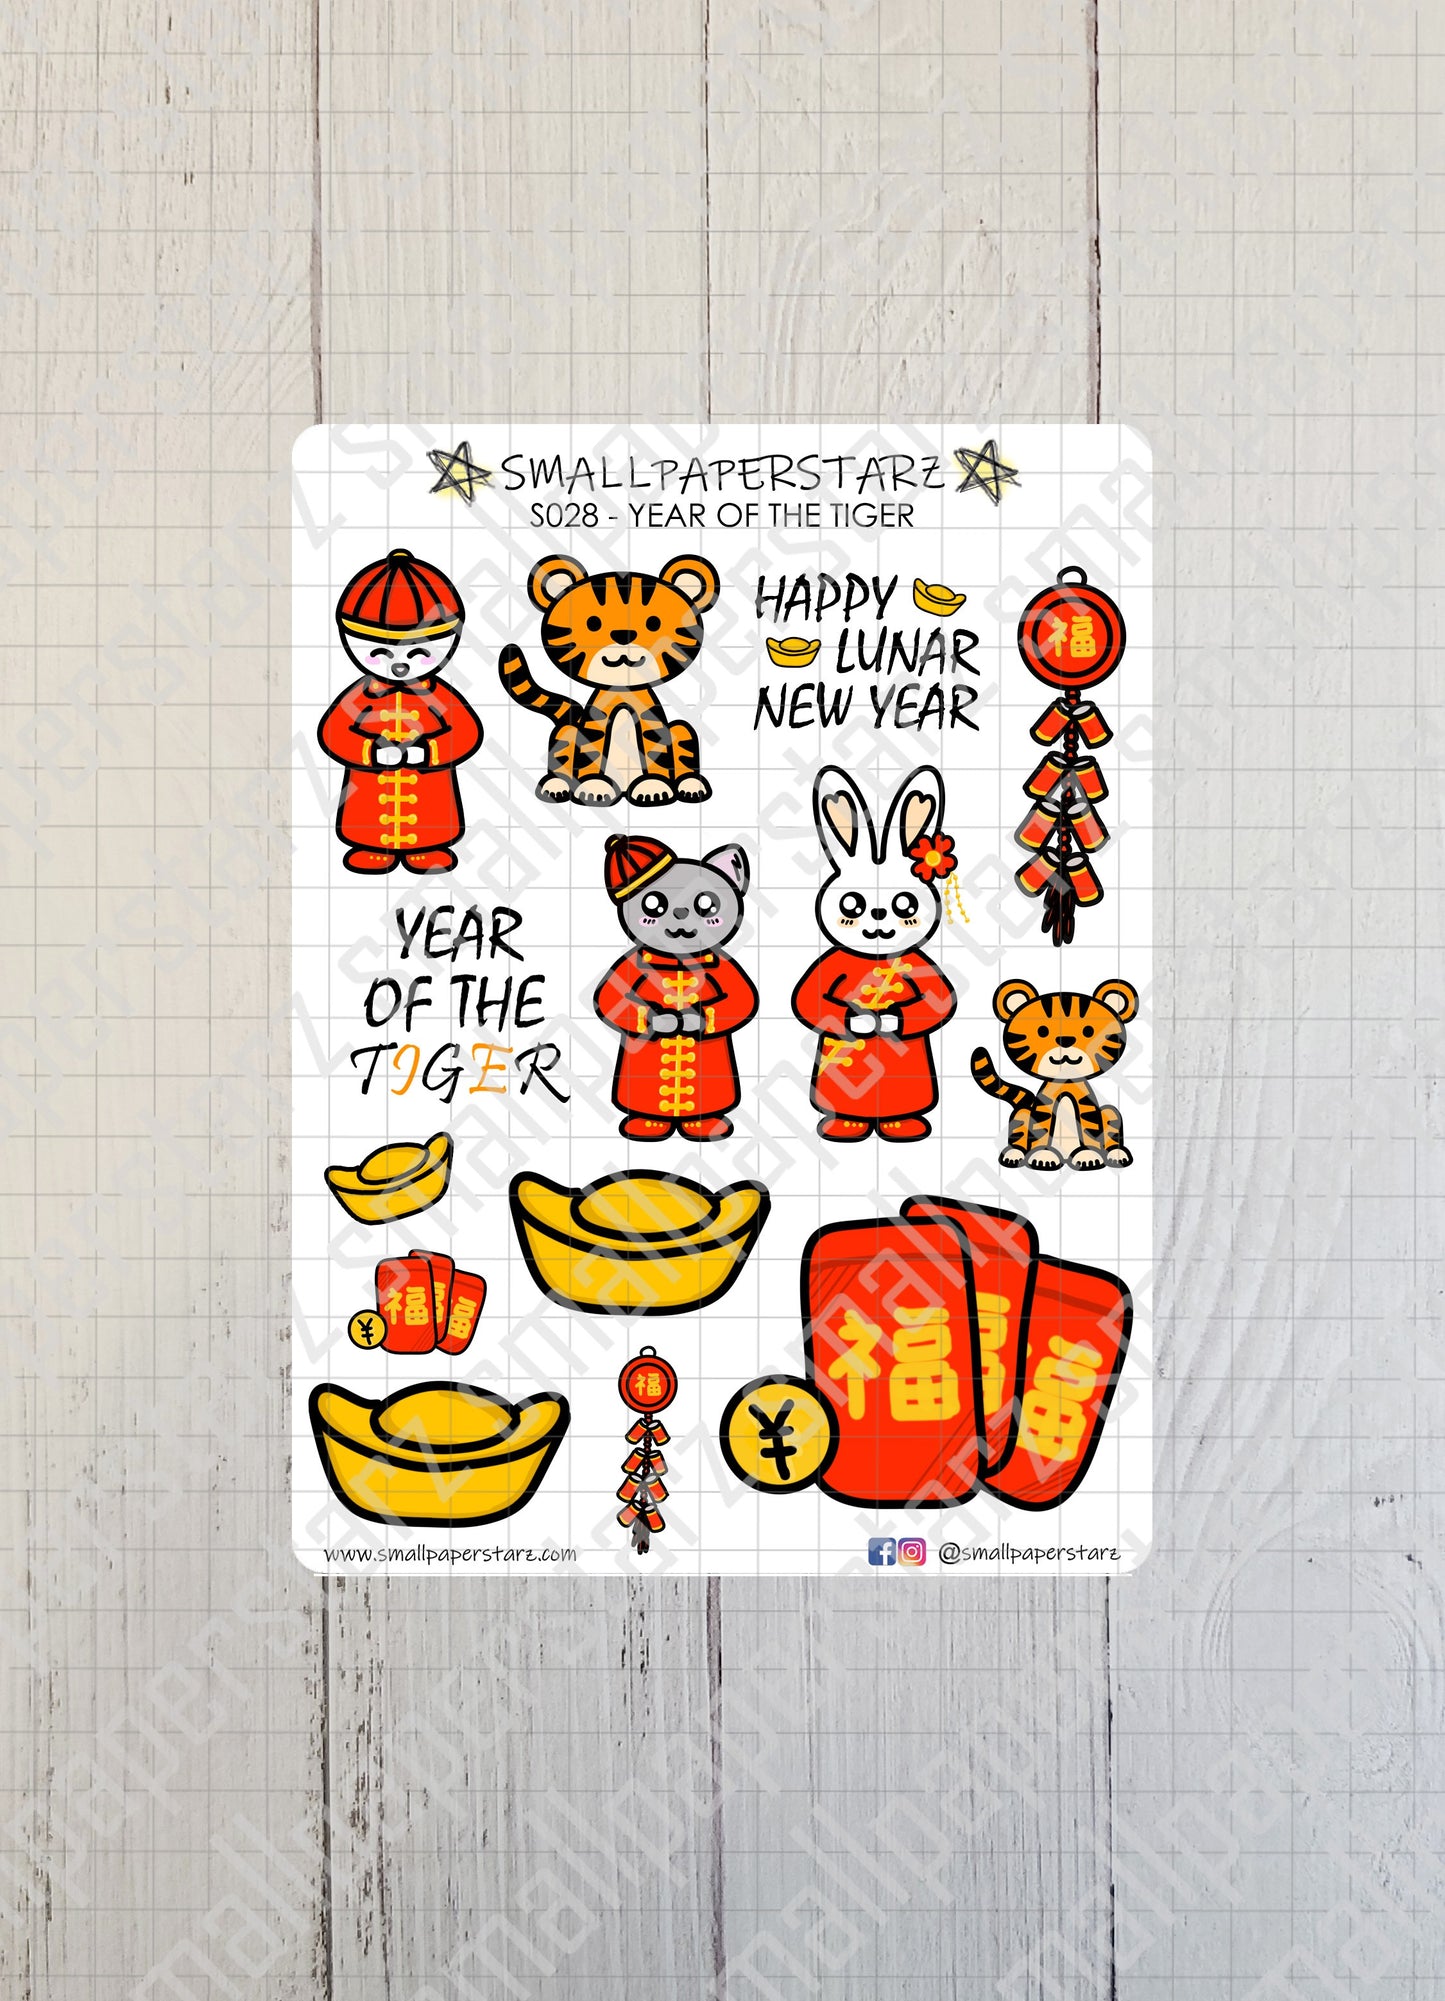 S028 - Year of the Tiger Chinese New Year / Lunar New Year 2022 Sticker Sheet